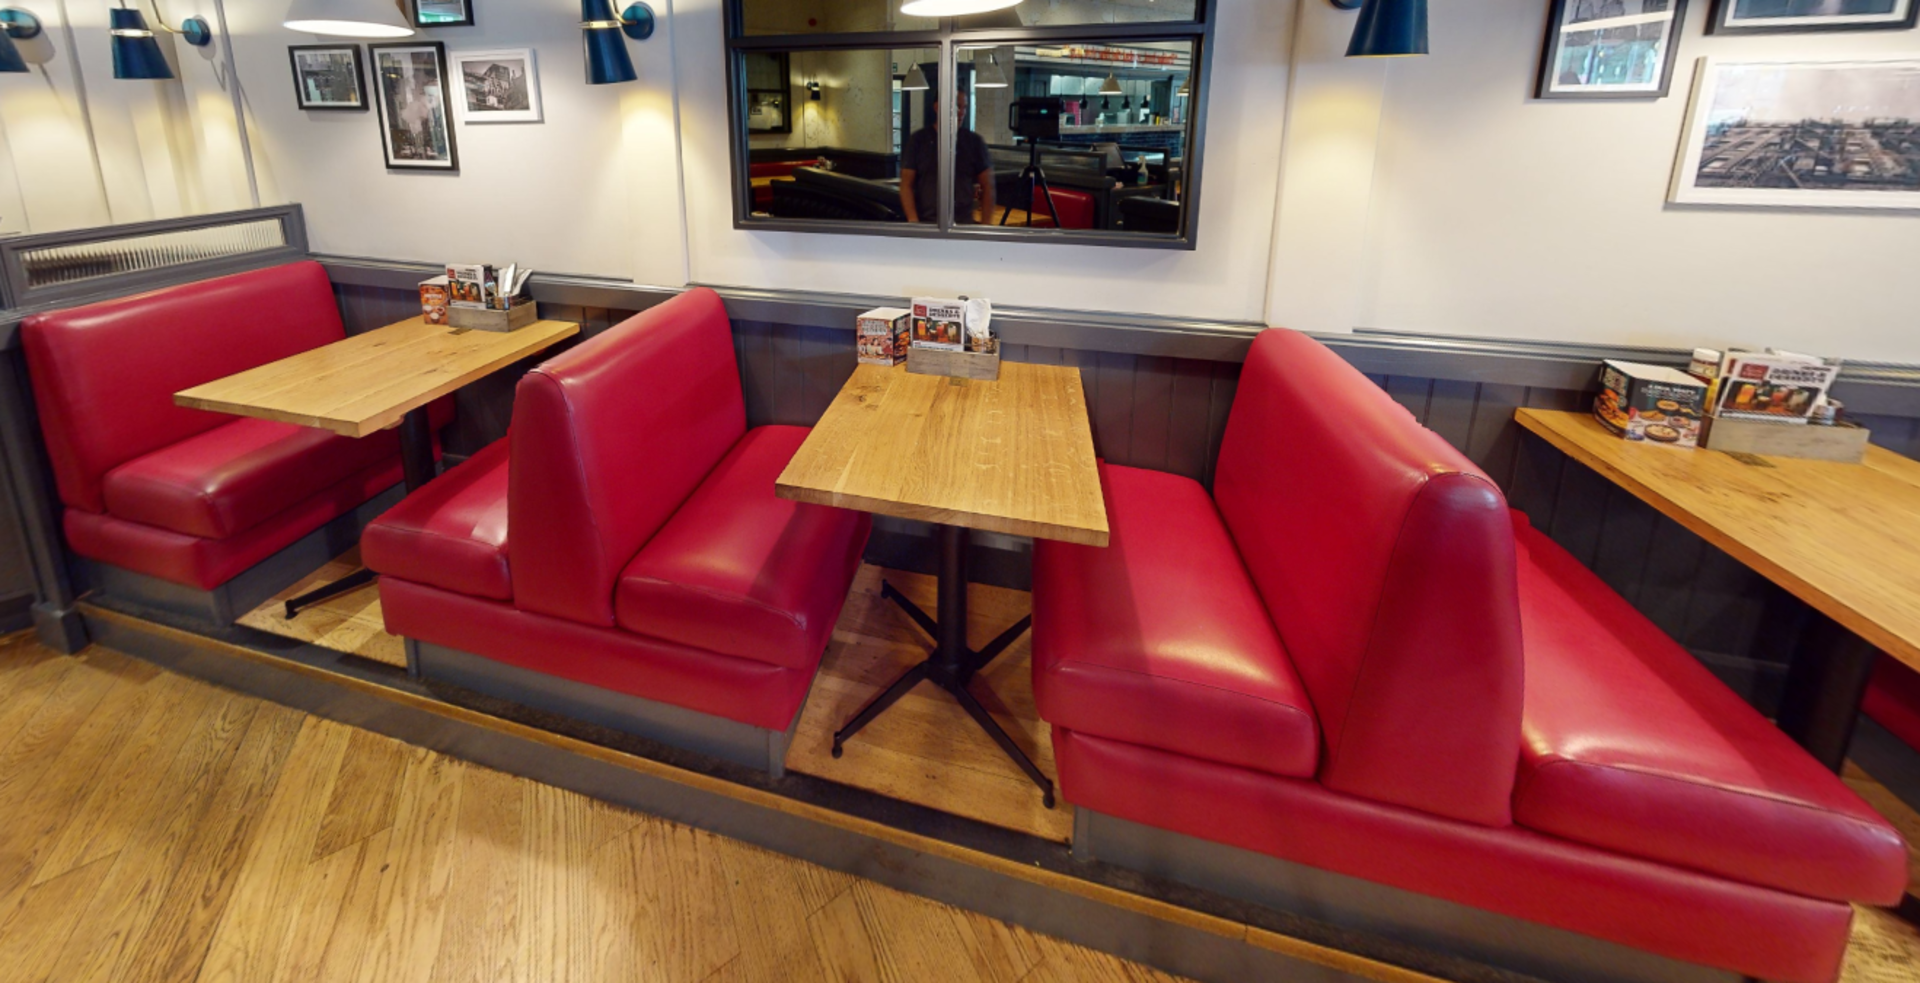 1 x Collection of Restaurant Seating Benches - Single Seat Benches in Red Faux Leather - Image 3 of 5